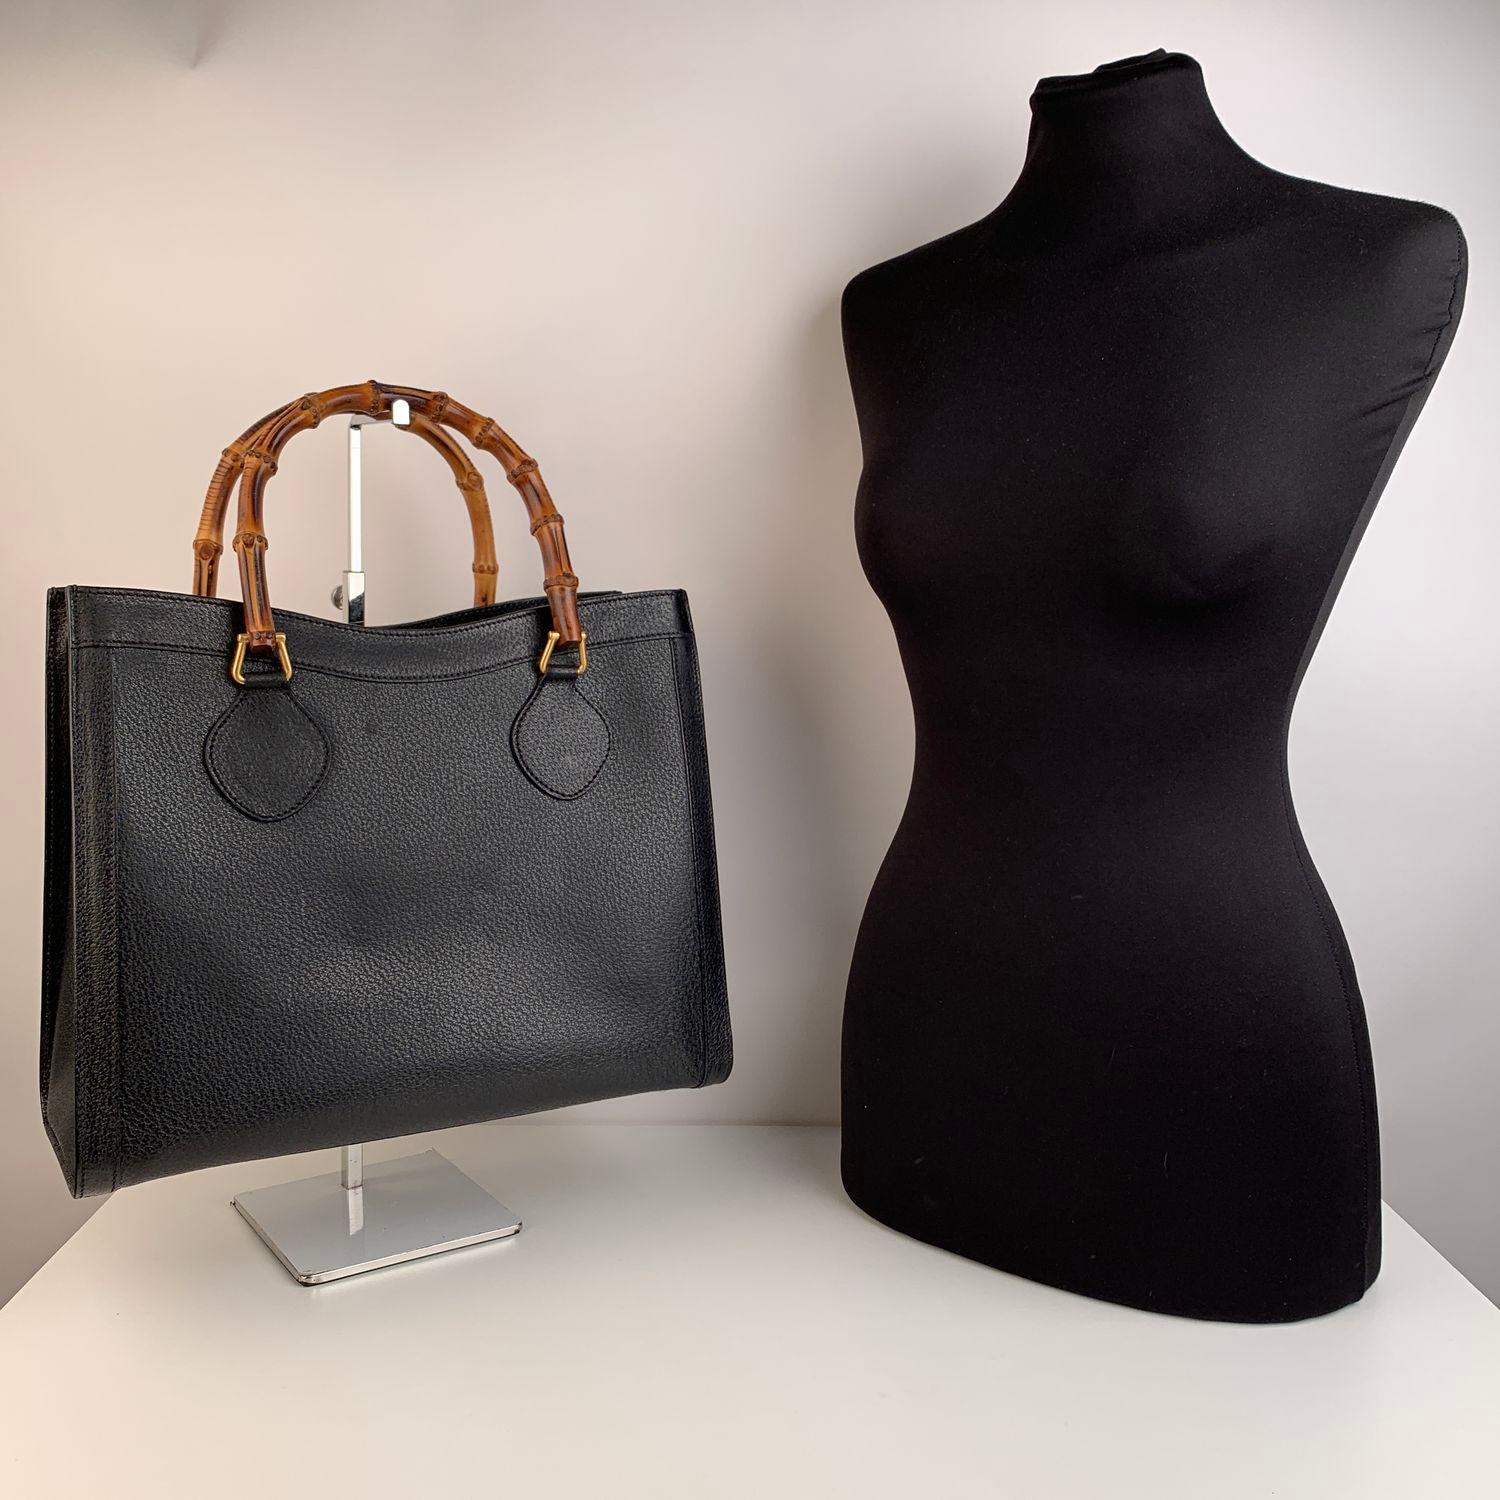 Beautiful Gucci Bamboo tote bag in black leather. Double distinctive Bamboo handle.  Princess Diana, was snapped carrying a this model on several occasions . Magnetic button closure on top. Black leather microfiber lining. 5 bottom feet. Gold metal